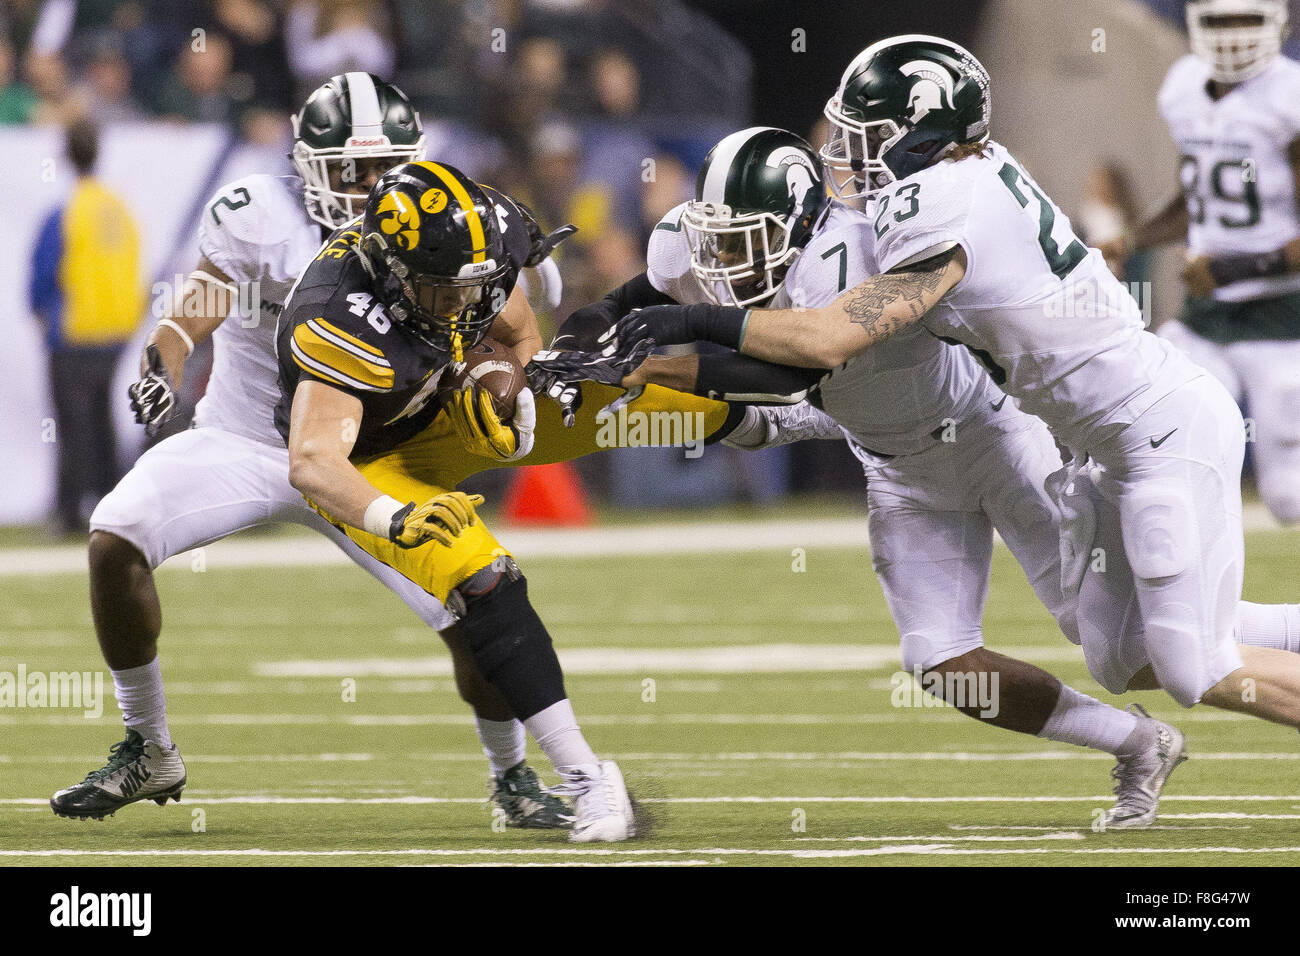 Indianapolis, Iowa, USA. 5th Dec, 2015. Michigan State Spartans cornerback Darian Hicks (2) Demetrious Cox and Chris Frey knock Iowa Hawkeyes tight end George Kittle (46) to the ground after his first down grab in the Big Ten Championship at Lucas Oil Stadium Between the Michigan State Spartans and the Iowa Hawkeyes in Indianapolis, In., Saturday, Dec. 5th, 2015. © Louis Brems/Quad-City Times/ZUMA Wire/Alamy Live News Stock Photo